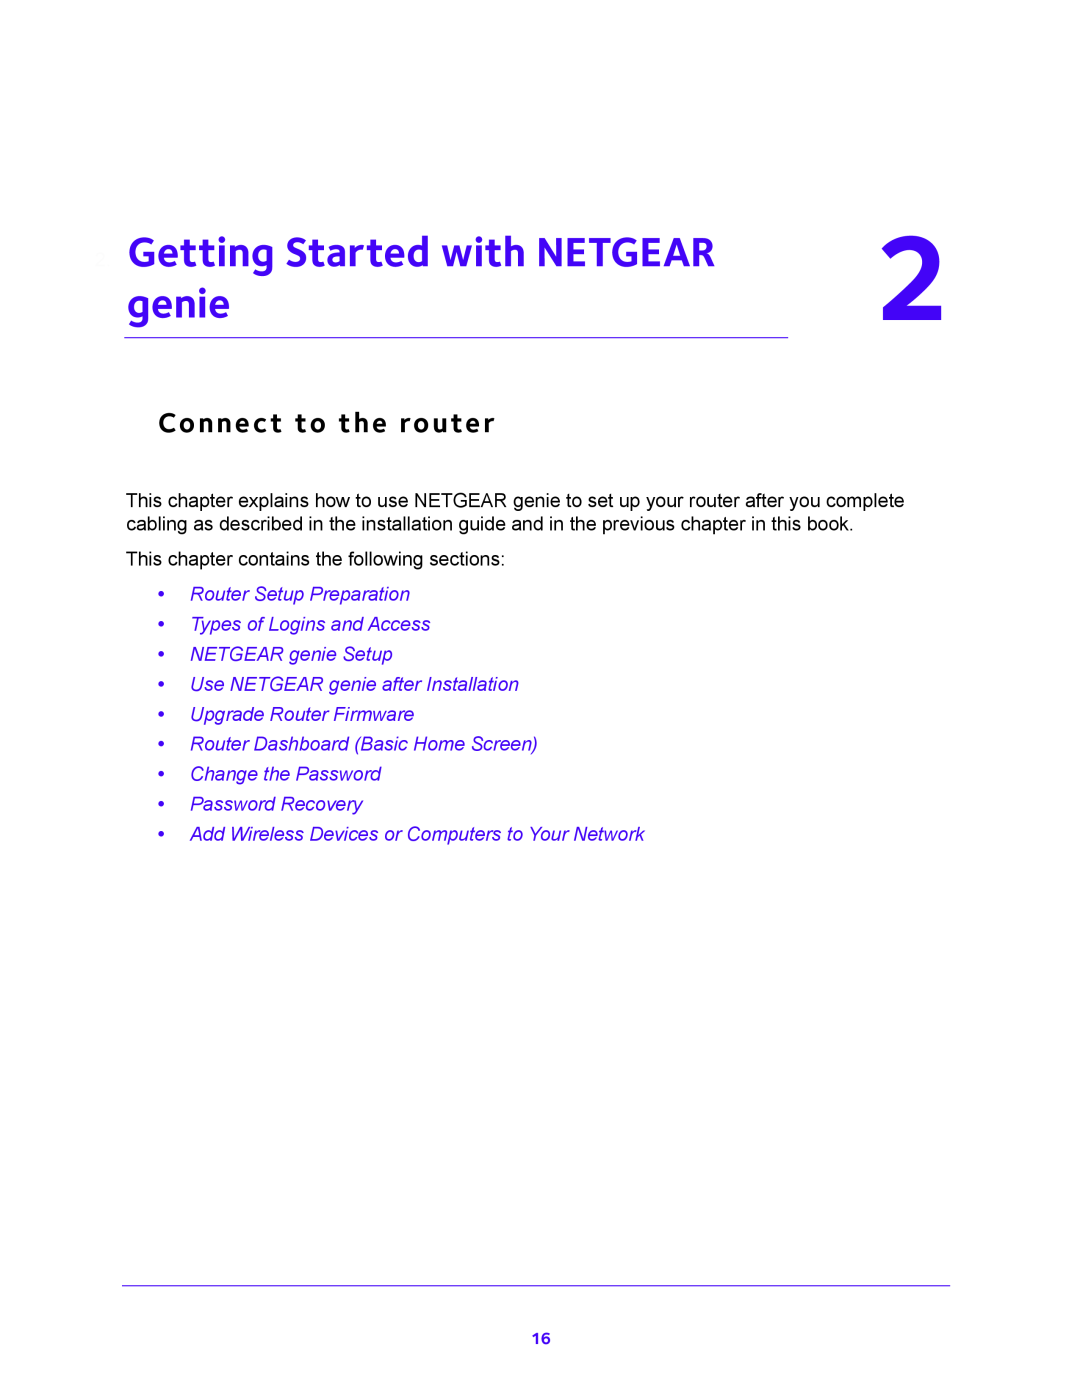 NETGEAR WNR2000 Getting Started with NETGEAR, genie, Connect to the router, Change the Password Password Recovery 